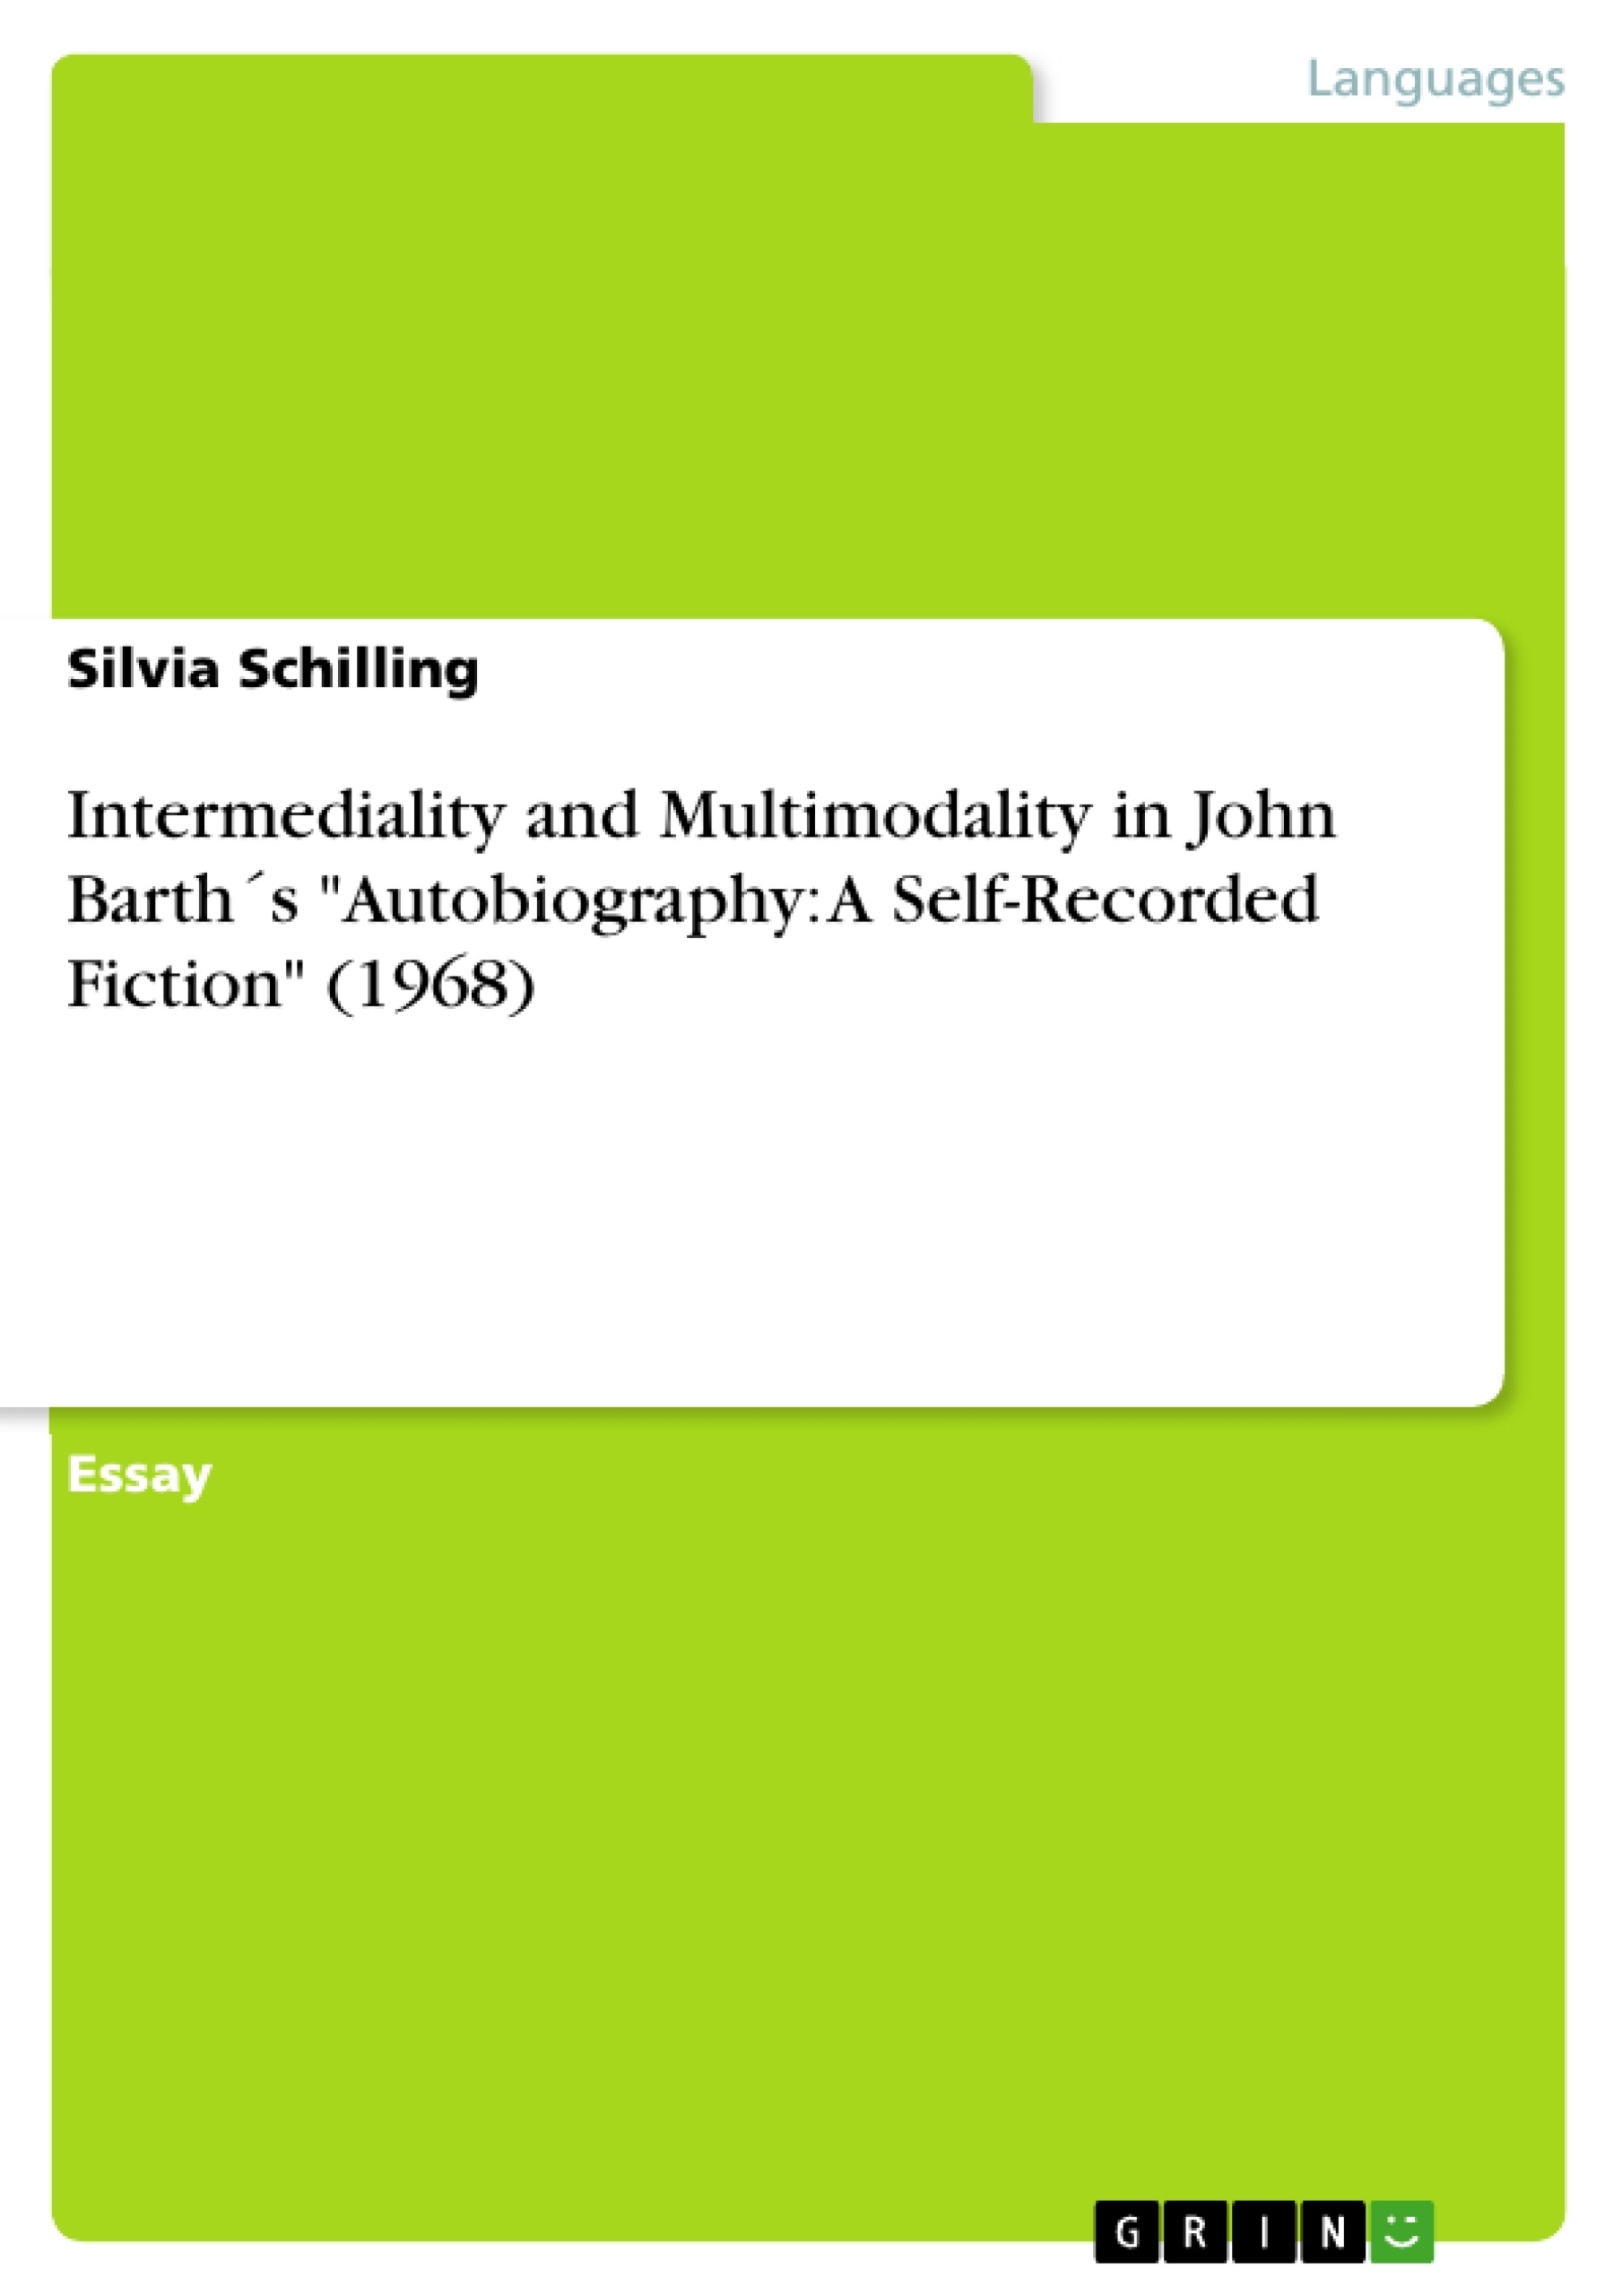 Title: Intermediality and Multimodality in John Barth´s "Autobiography: A Self-Recorded Fiction" (1968)